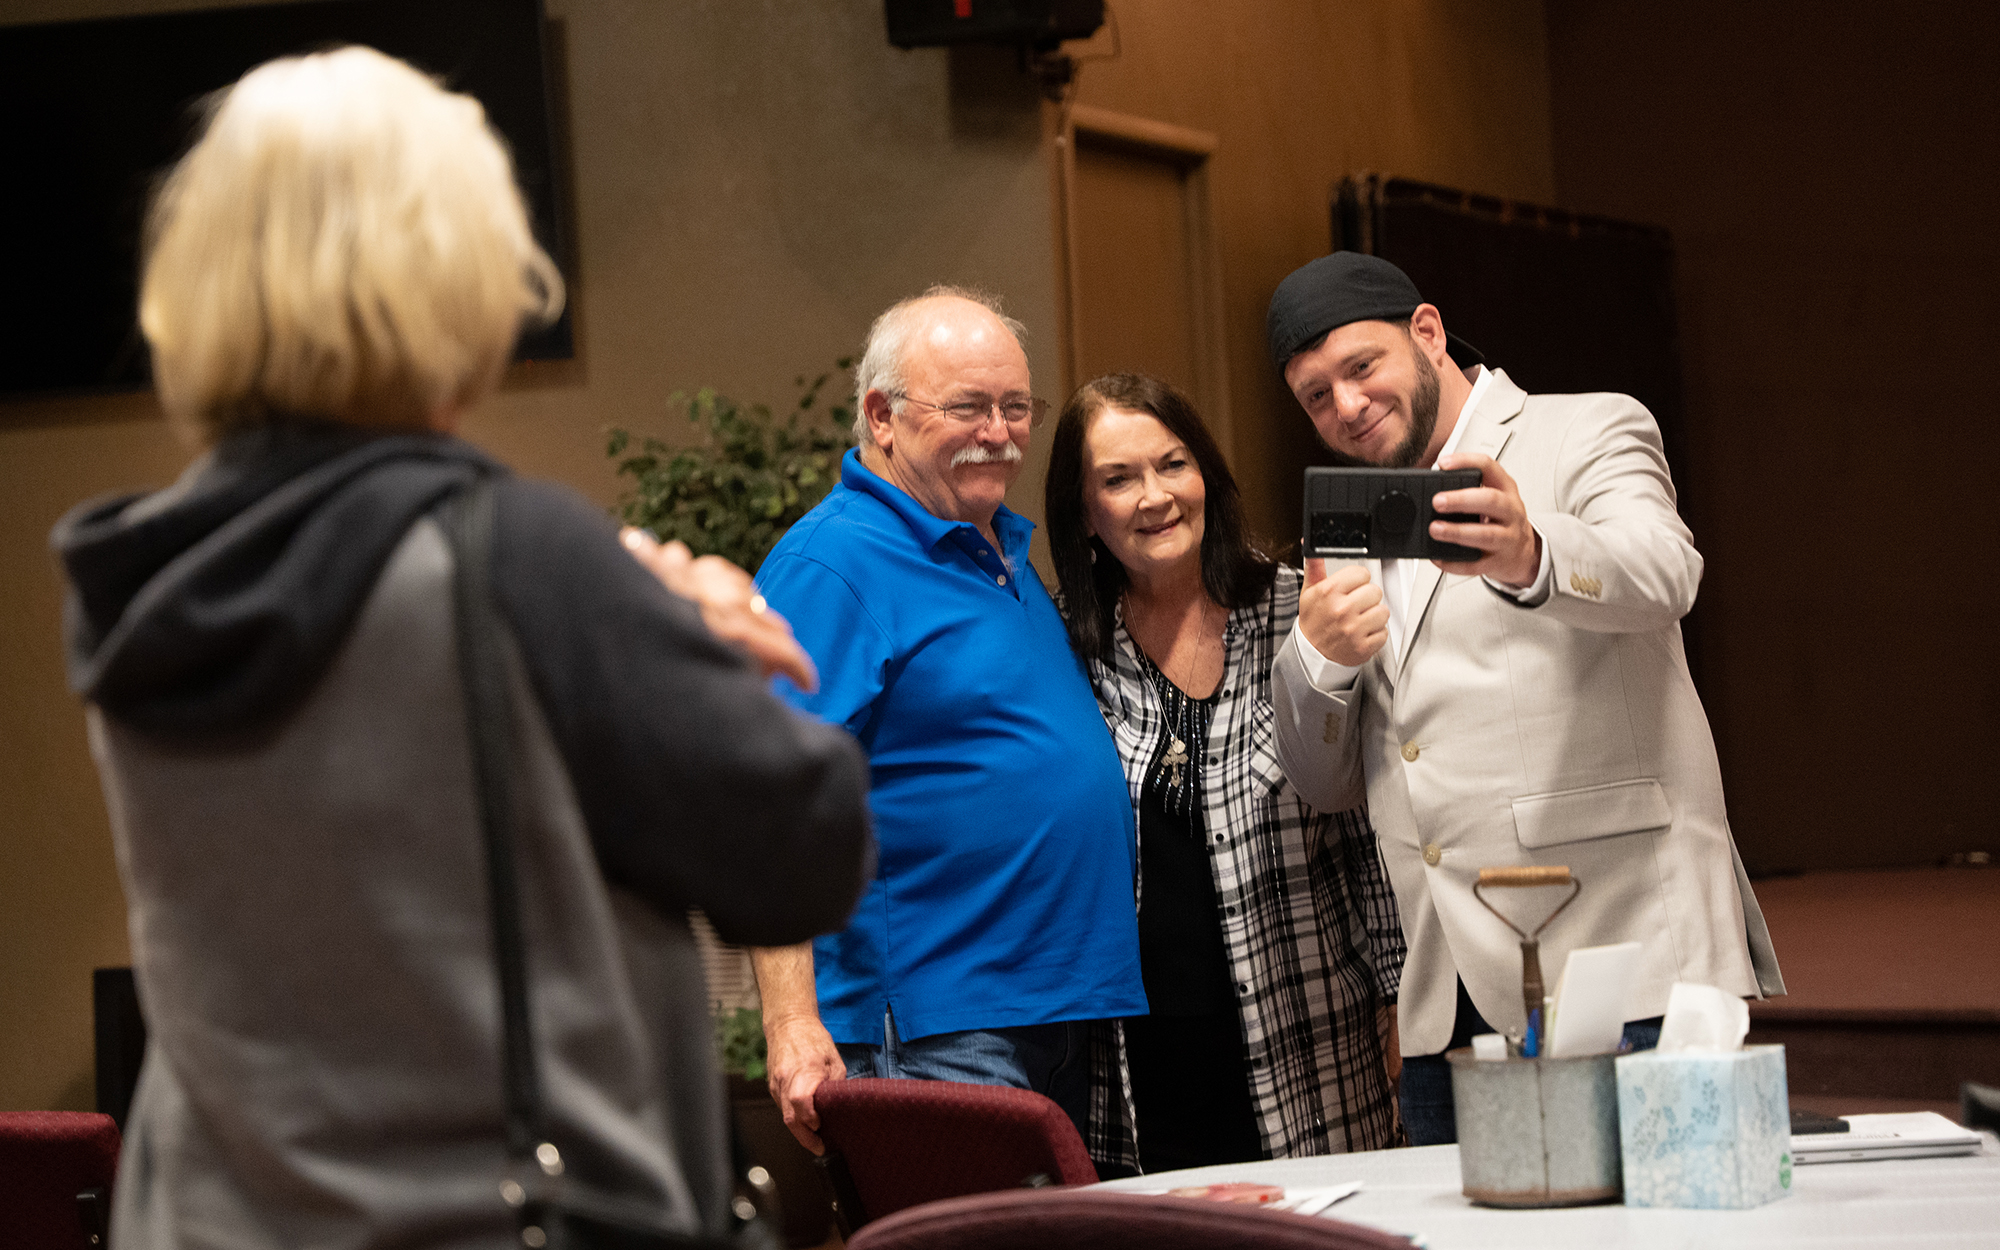 Mike and Kathy Forck take a selfie with Mark Lee Dickson, right, after a Sanctuary Cities for the Unborn interest meeting at Vineyard Church of Prescott Valley. (Photo by Mingson Lau/News21)